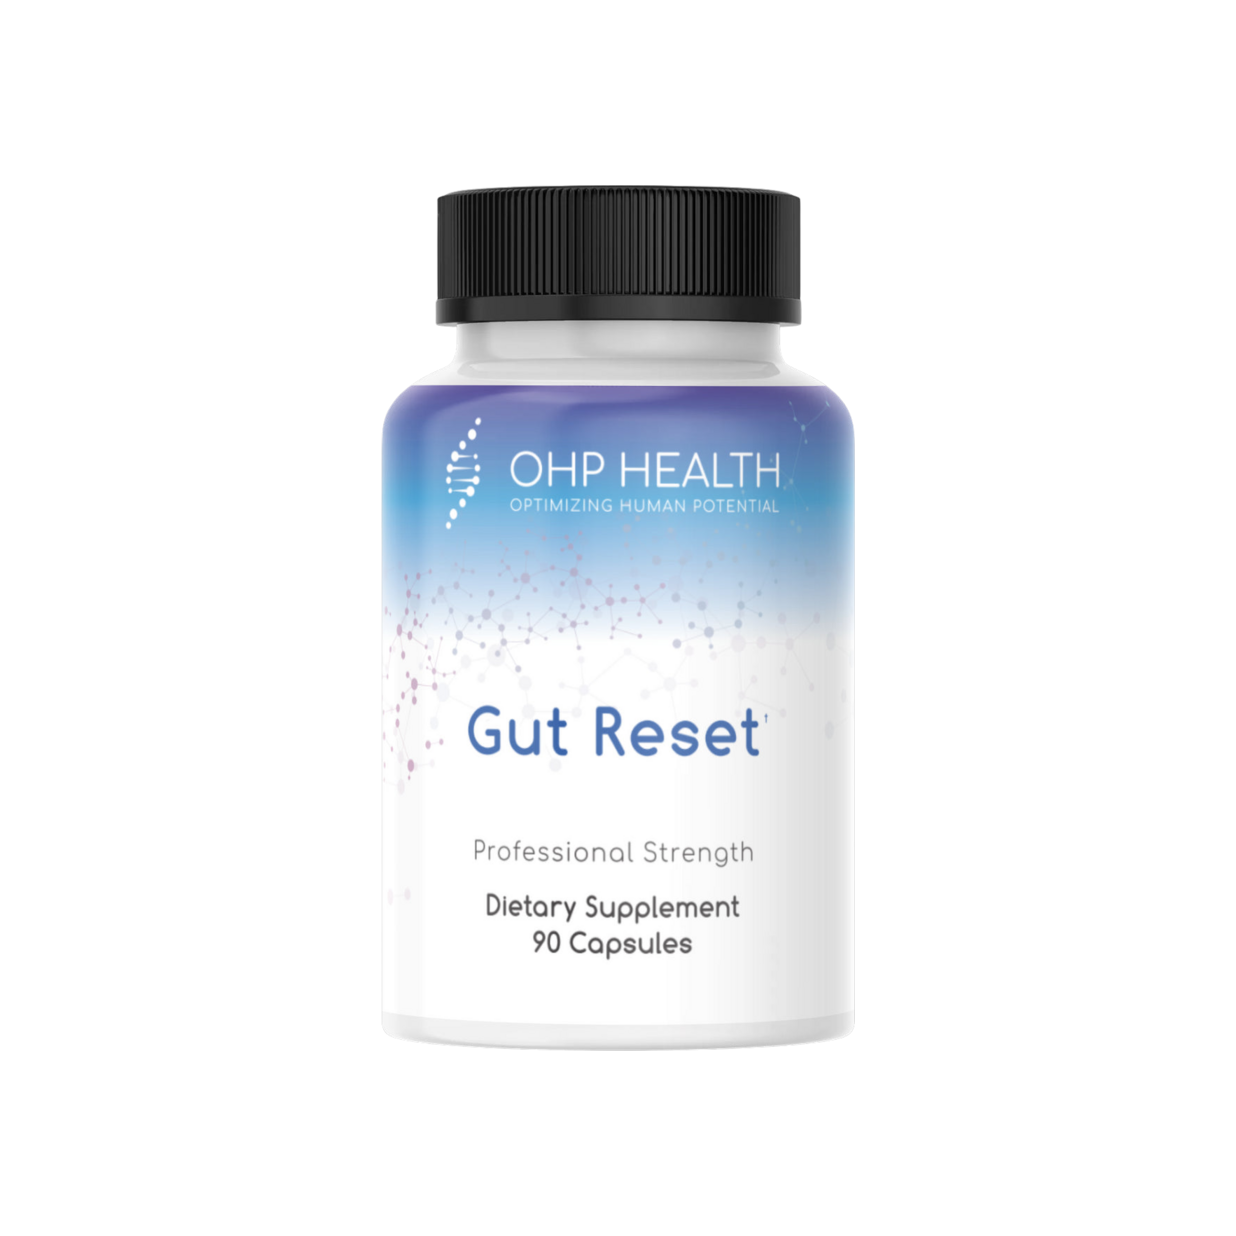 A bottle of Gut Reset | 90 caps by OHP Health with a black background.